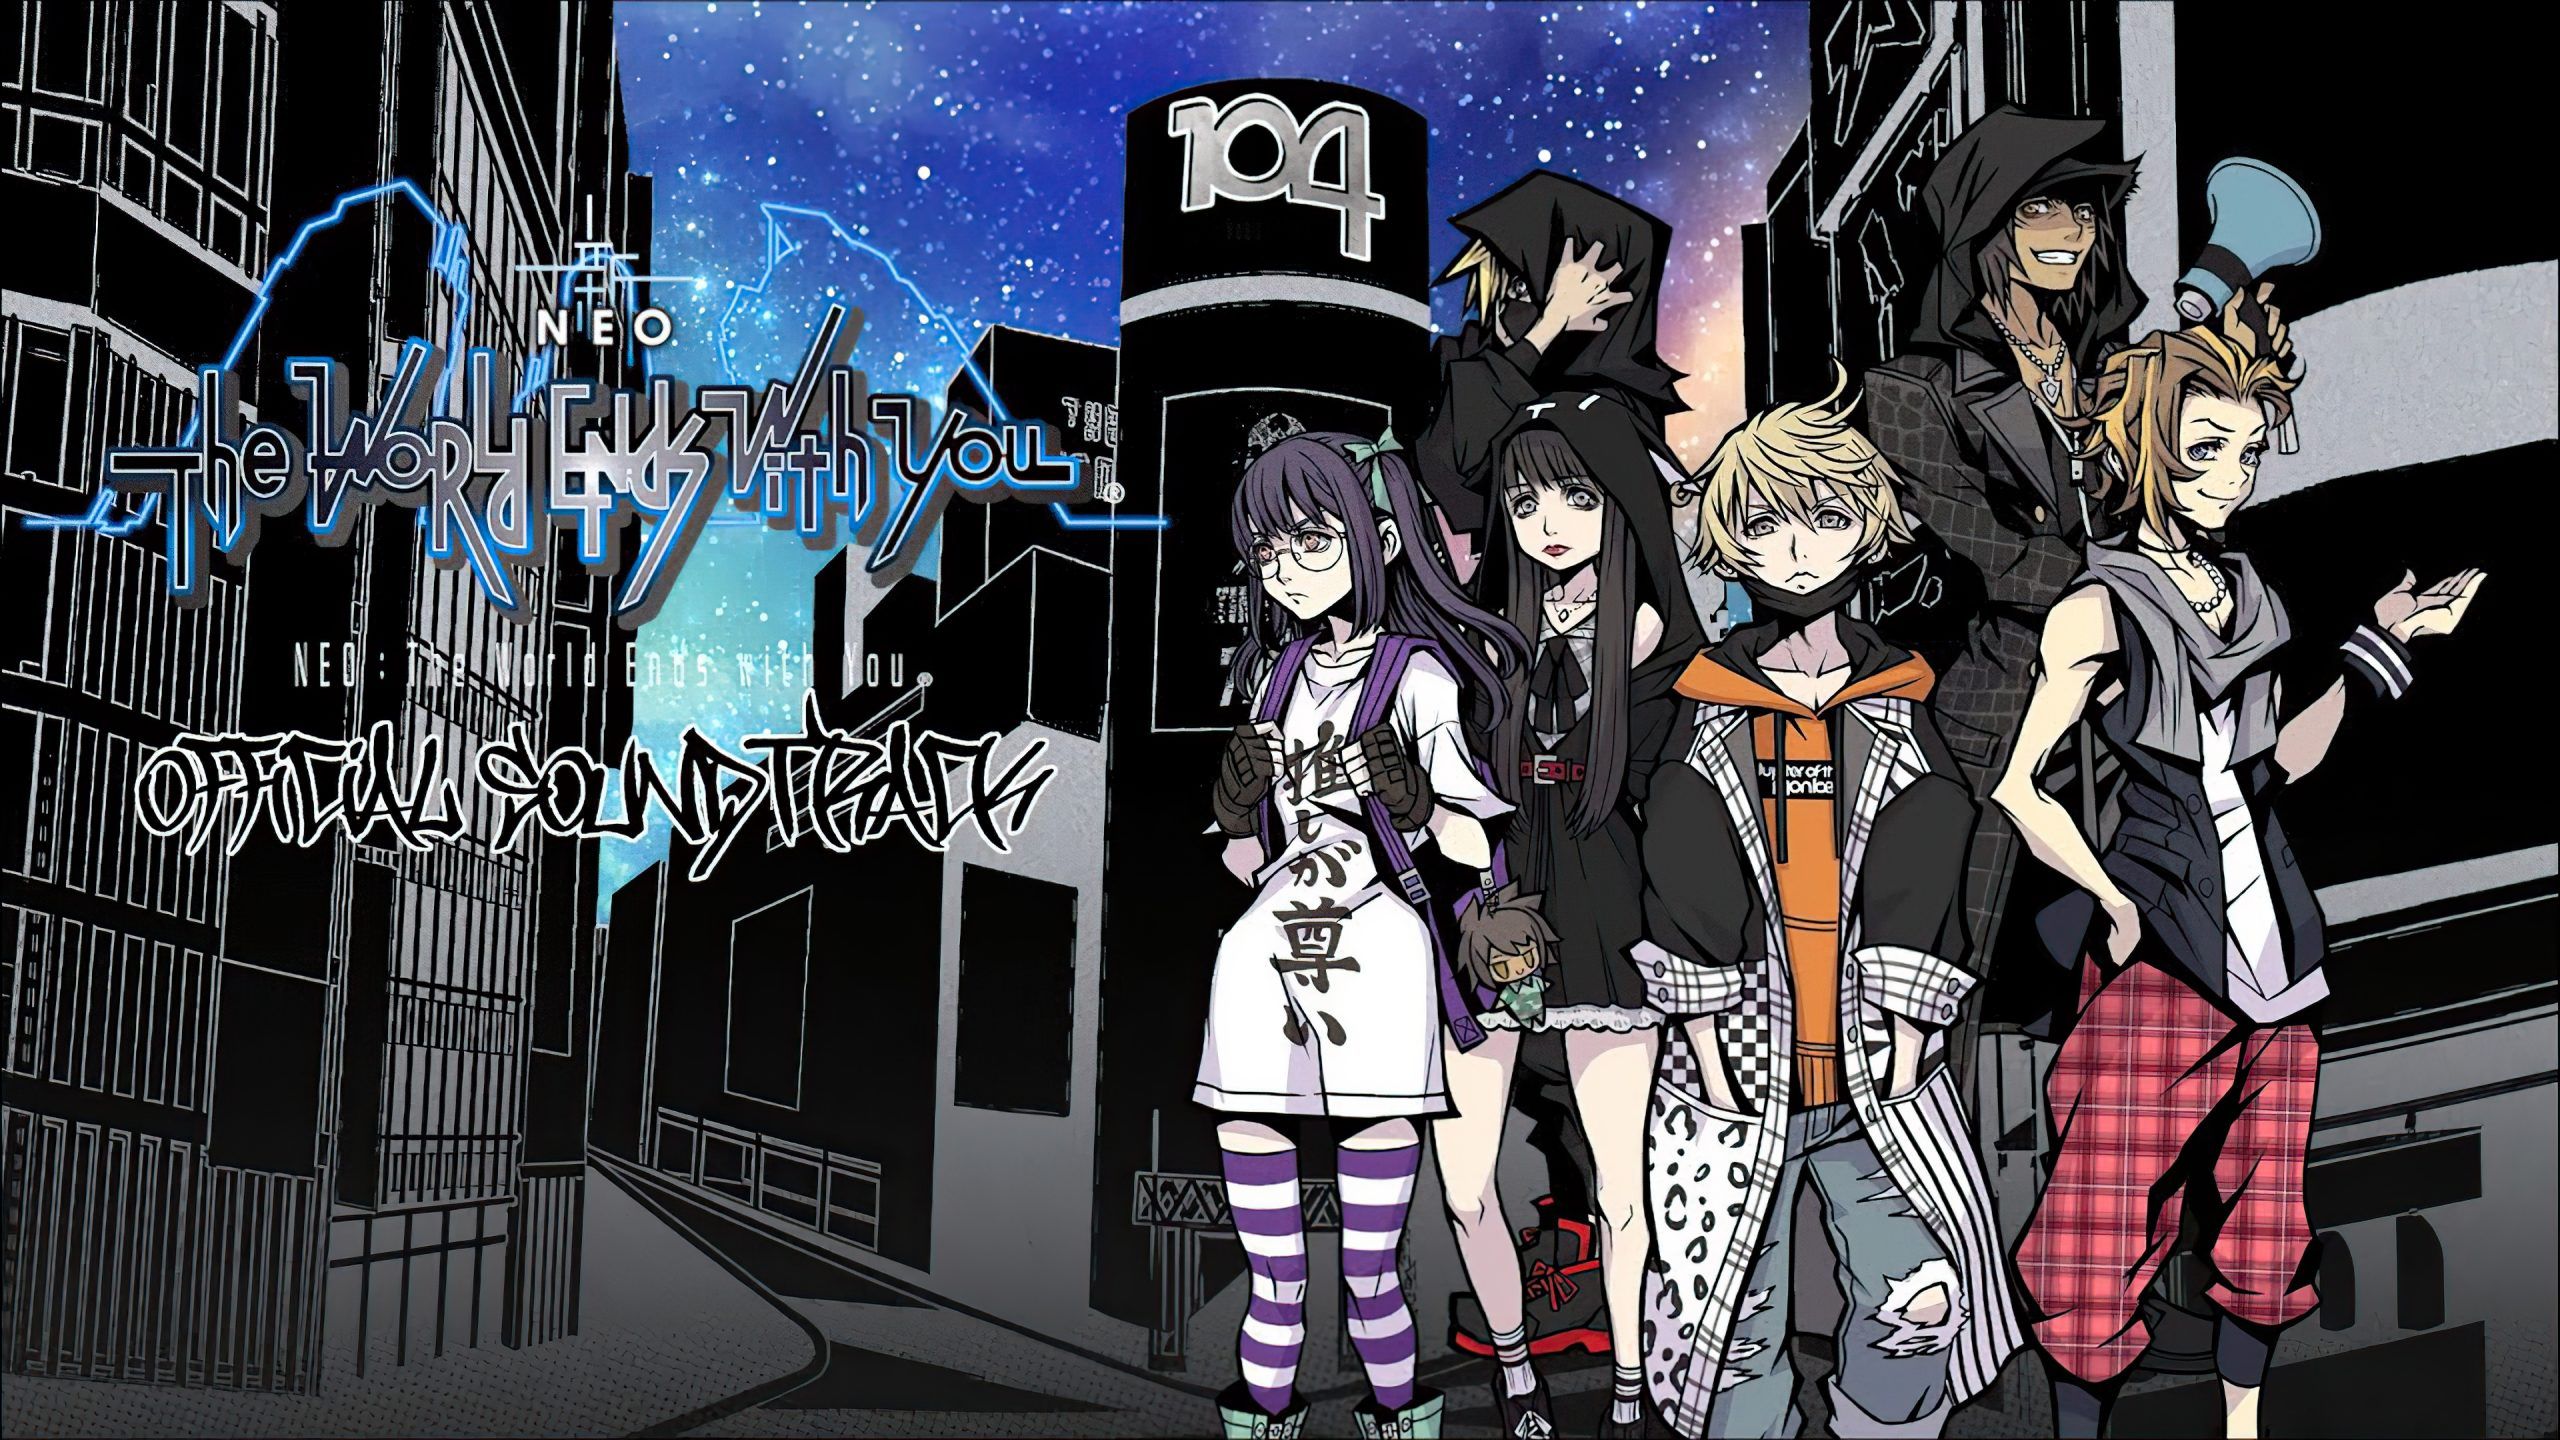 NEO: The World Ends With You Hands On Preview The Second Reapers' Game Begin